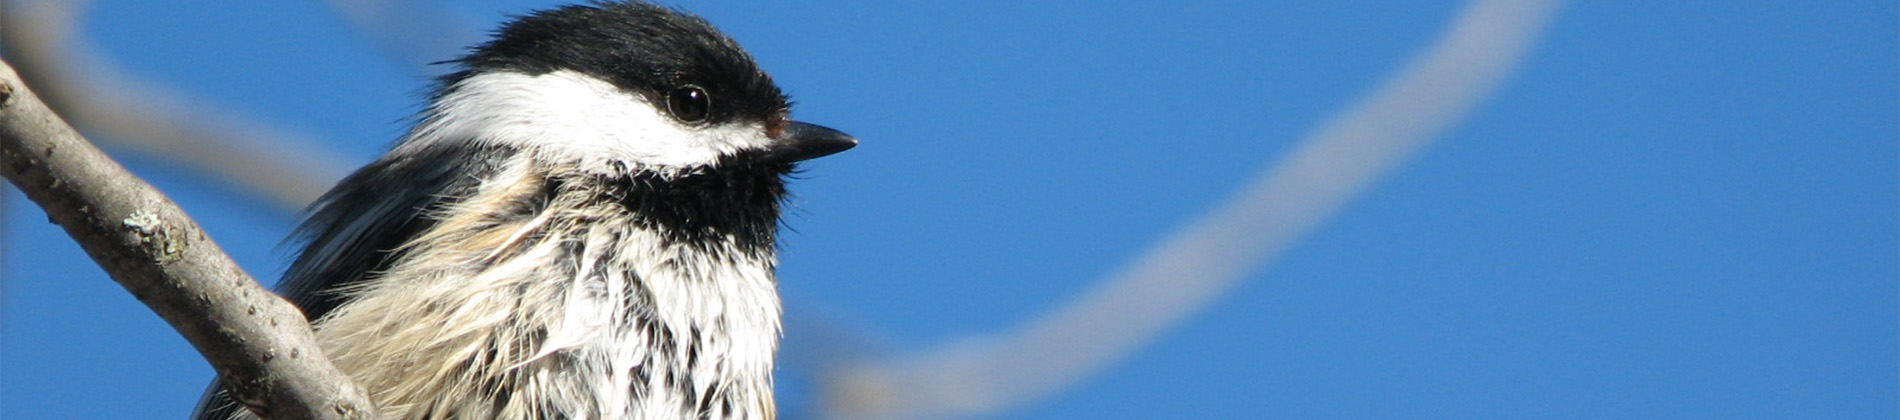 Image of a Black-capped Chickadee